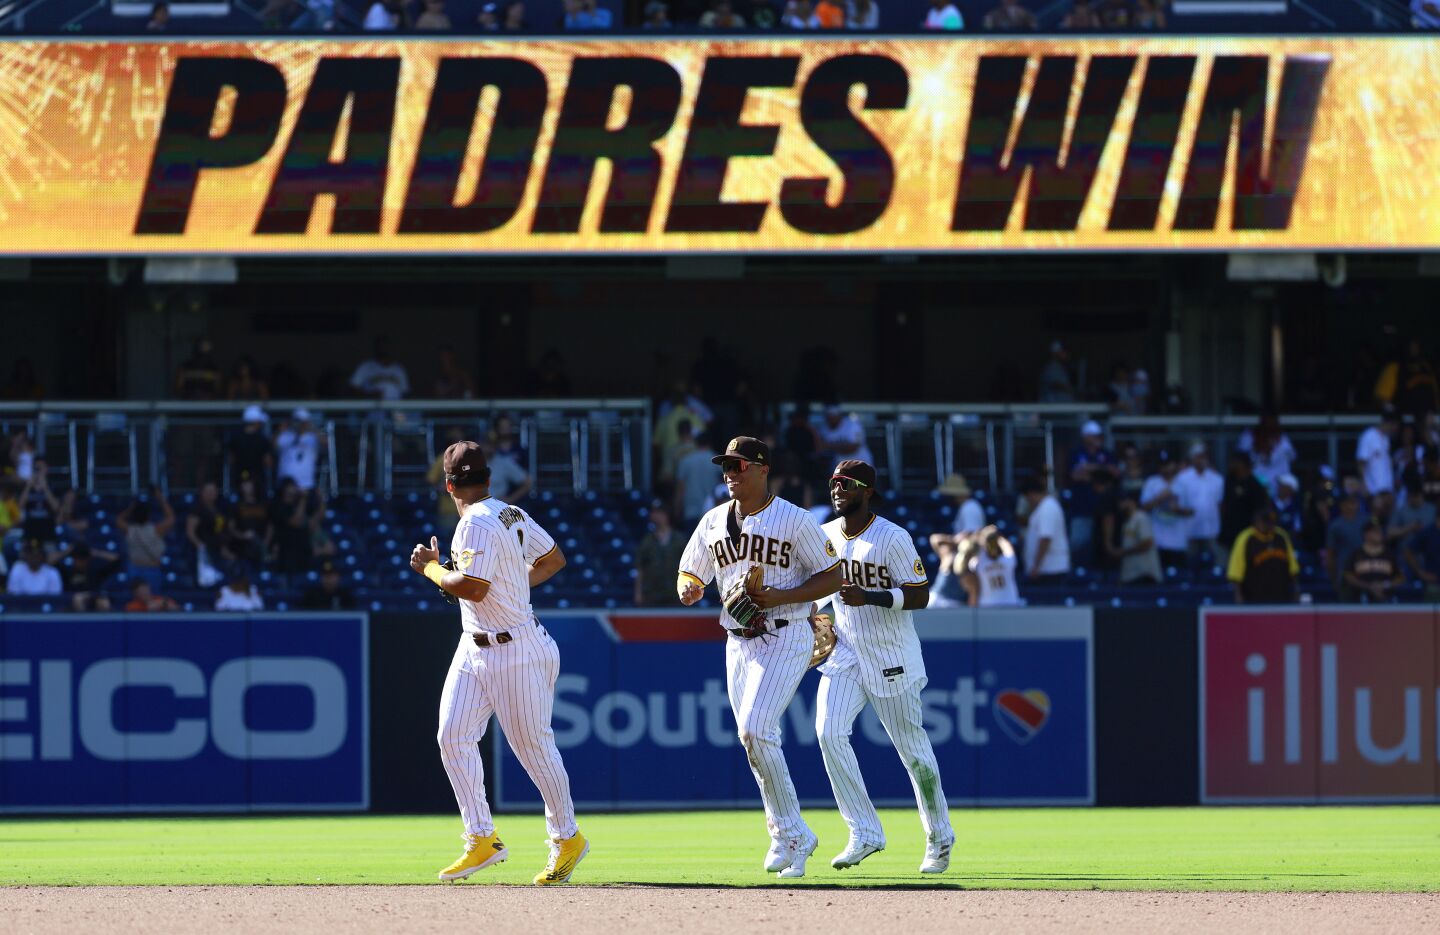 San Diego Padres (63-51, 2nd in NL West)The Padres had lost five in a row and went 26 innings without scoring before outscoring the Giants, 20-11, over their last two games. They trail the Dodgers by 16 games in the division and enter the weekend in possession of the No. 6 seed, four games behind wild-card leader Atlanta (66-46) and a half-game behind the No. 5 Phillies (62-49). The Brewers (60-50) are one game behind the Padres. The Padres went 4-3 against the Nationals last year.